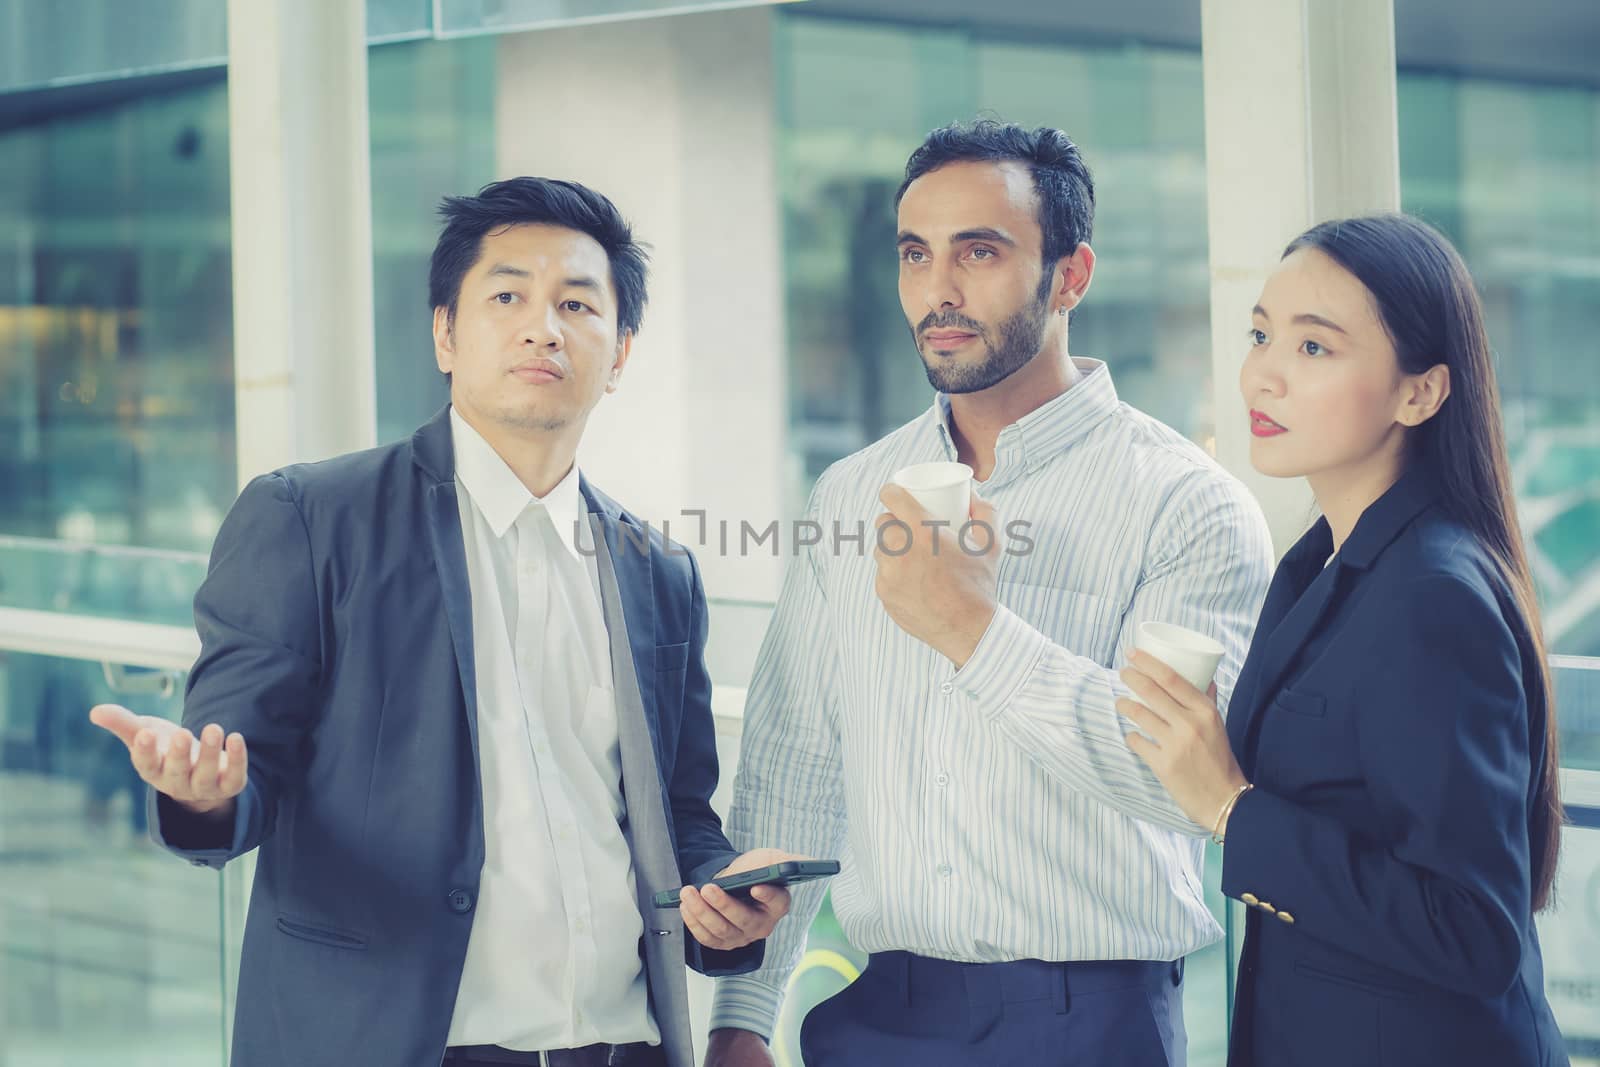 Two handsome young businessmen and lady in classic suits are holding cups of coffee, talking and smiling, standing outside the office building.